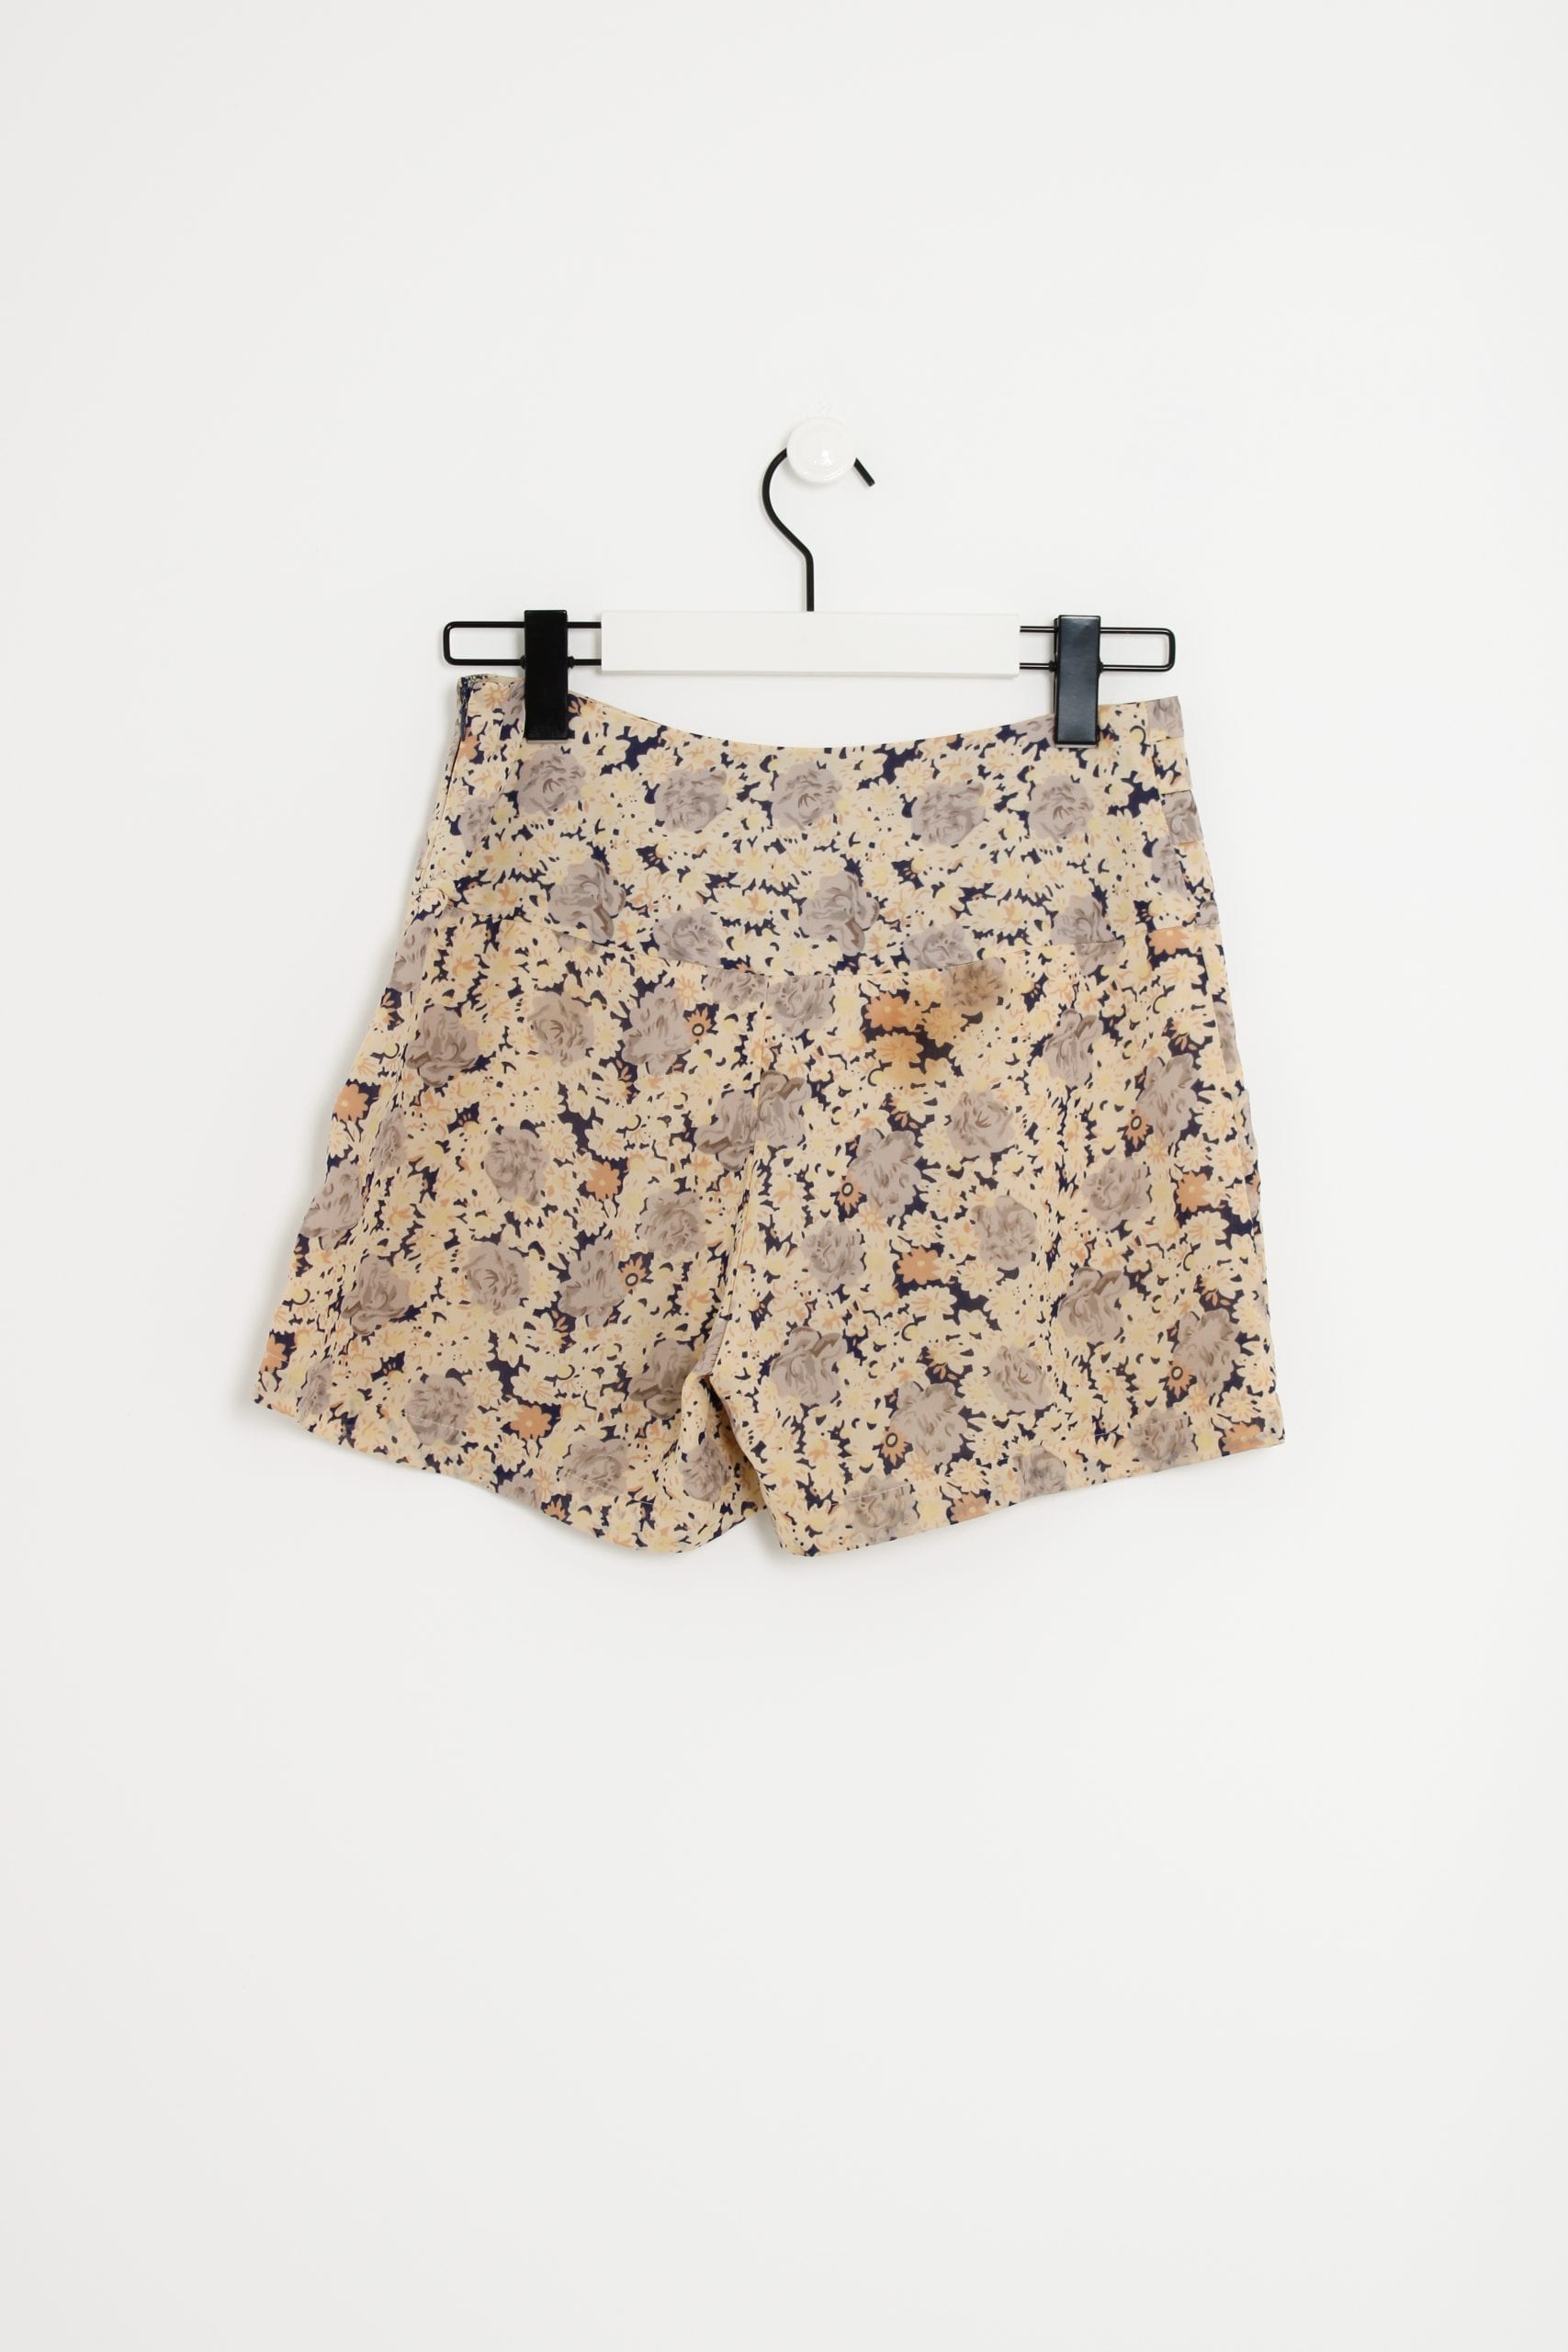 Floral short shorts - Swapology